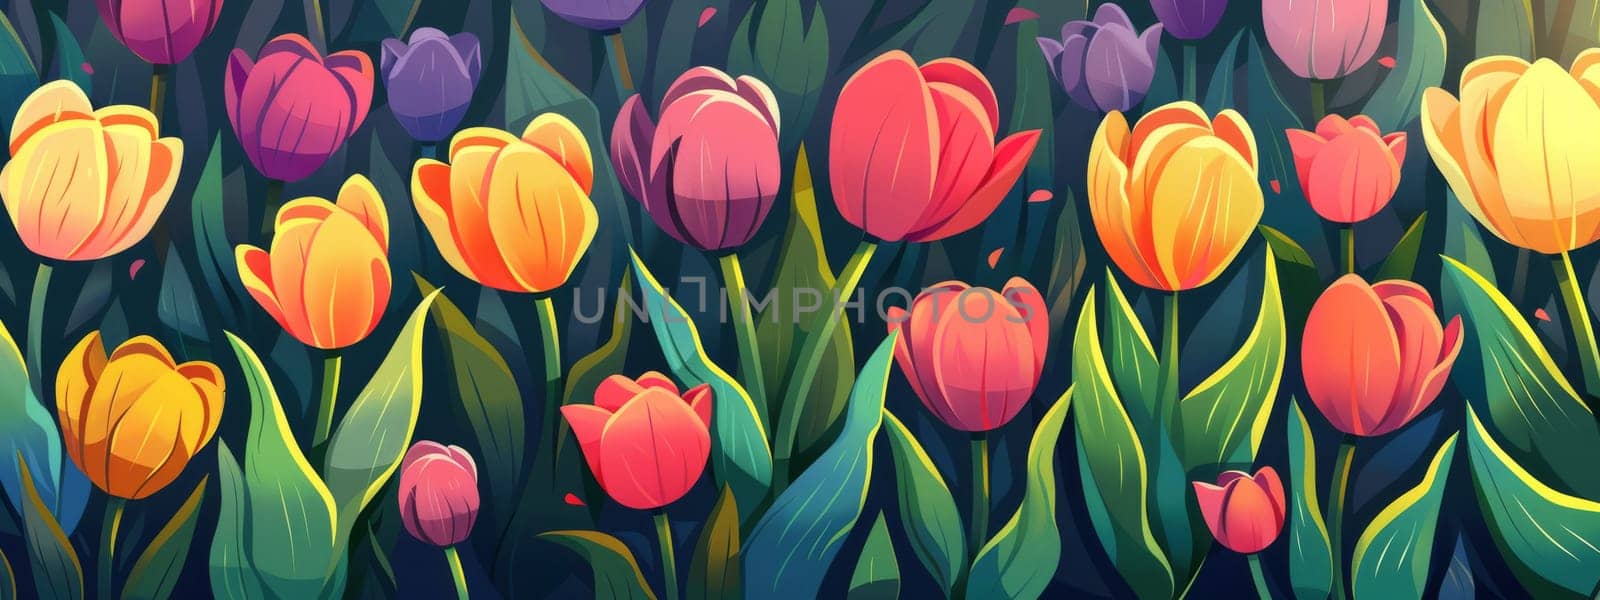 Colorful blooming tulips during spring time season by Kadula